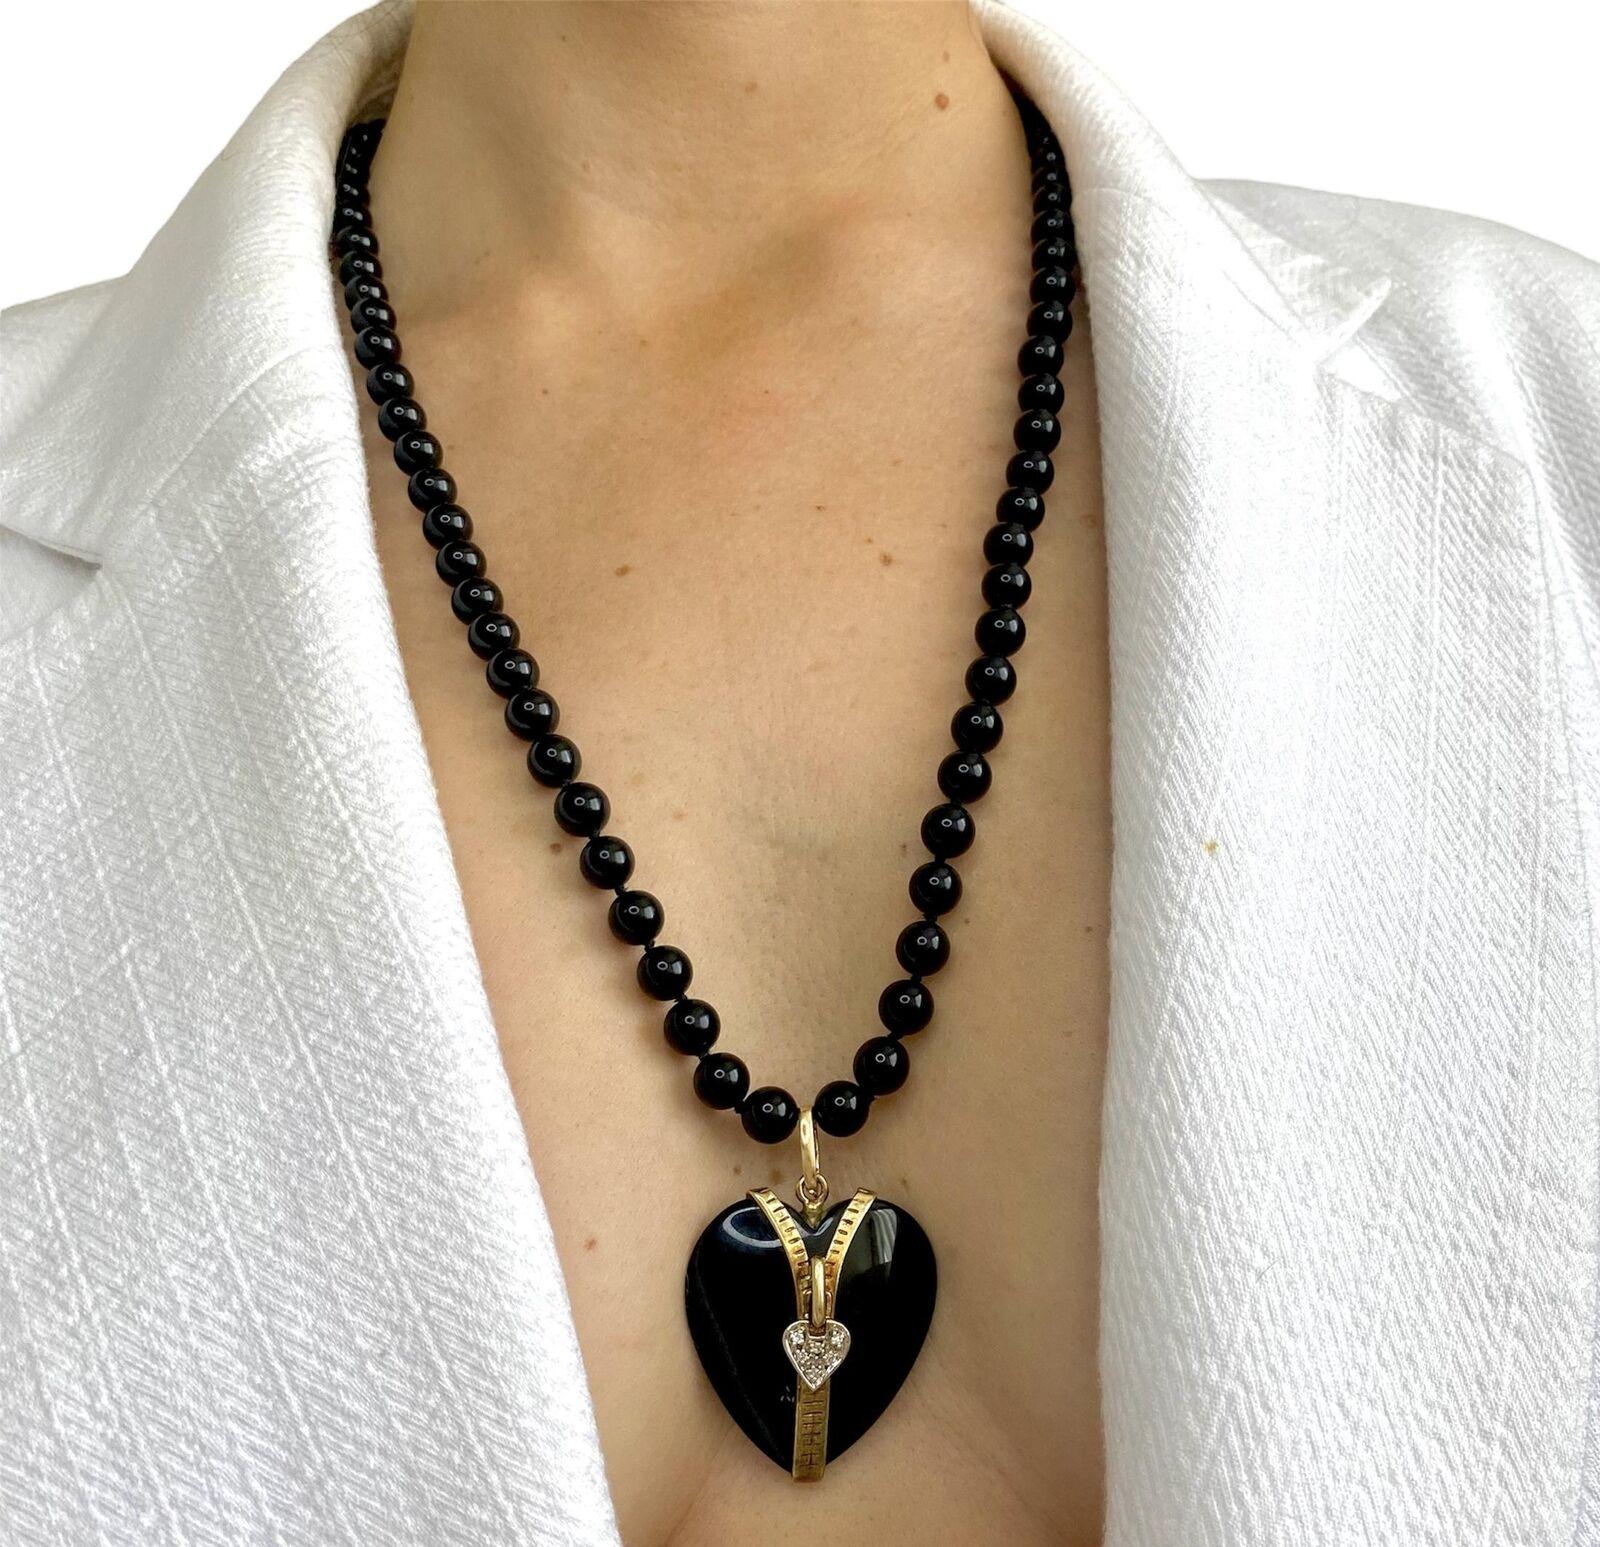 Vintage Onyx Heart Necklace 14K Yellow Gold With Diamonds 53.76G
Specifications:

·        Pre-Owned (Great condition)

·        Metal: 14K Yellow Gold (Au 54 - 58.3%)

·        Weight: 53.76Gr

·        Main Stone: Onyx

. Secondary stones: Diamonds